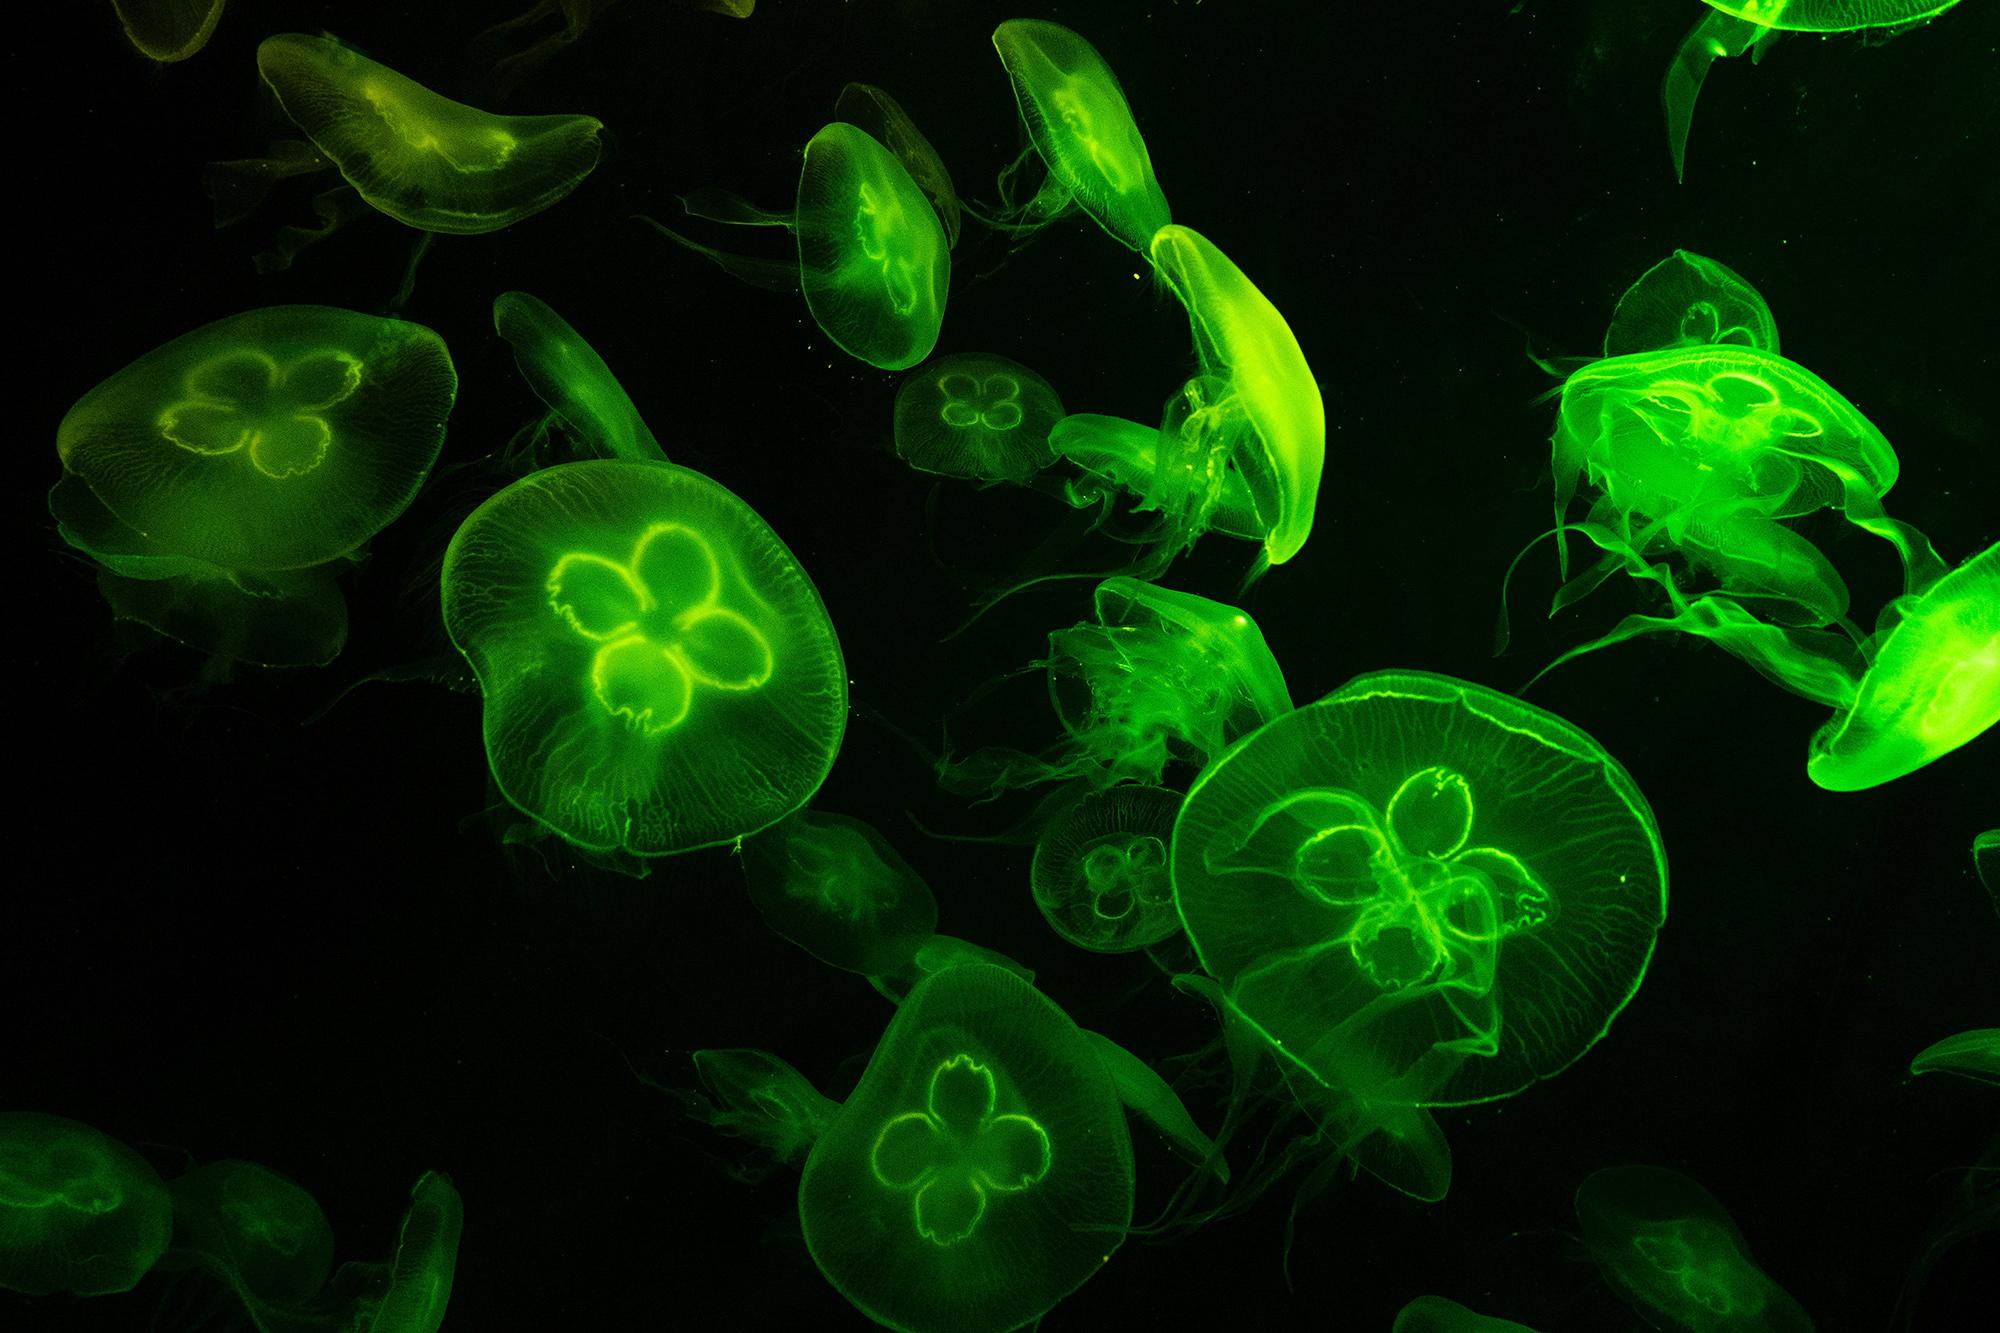 A photograph of a group of green jellyfishes